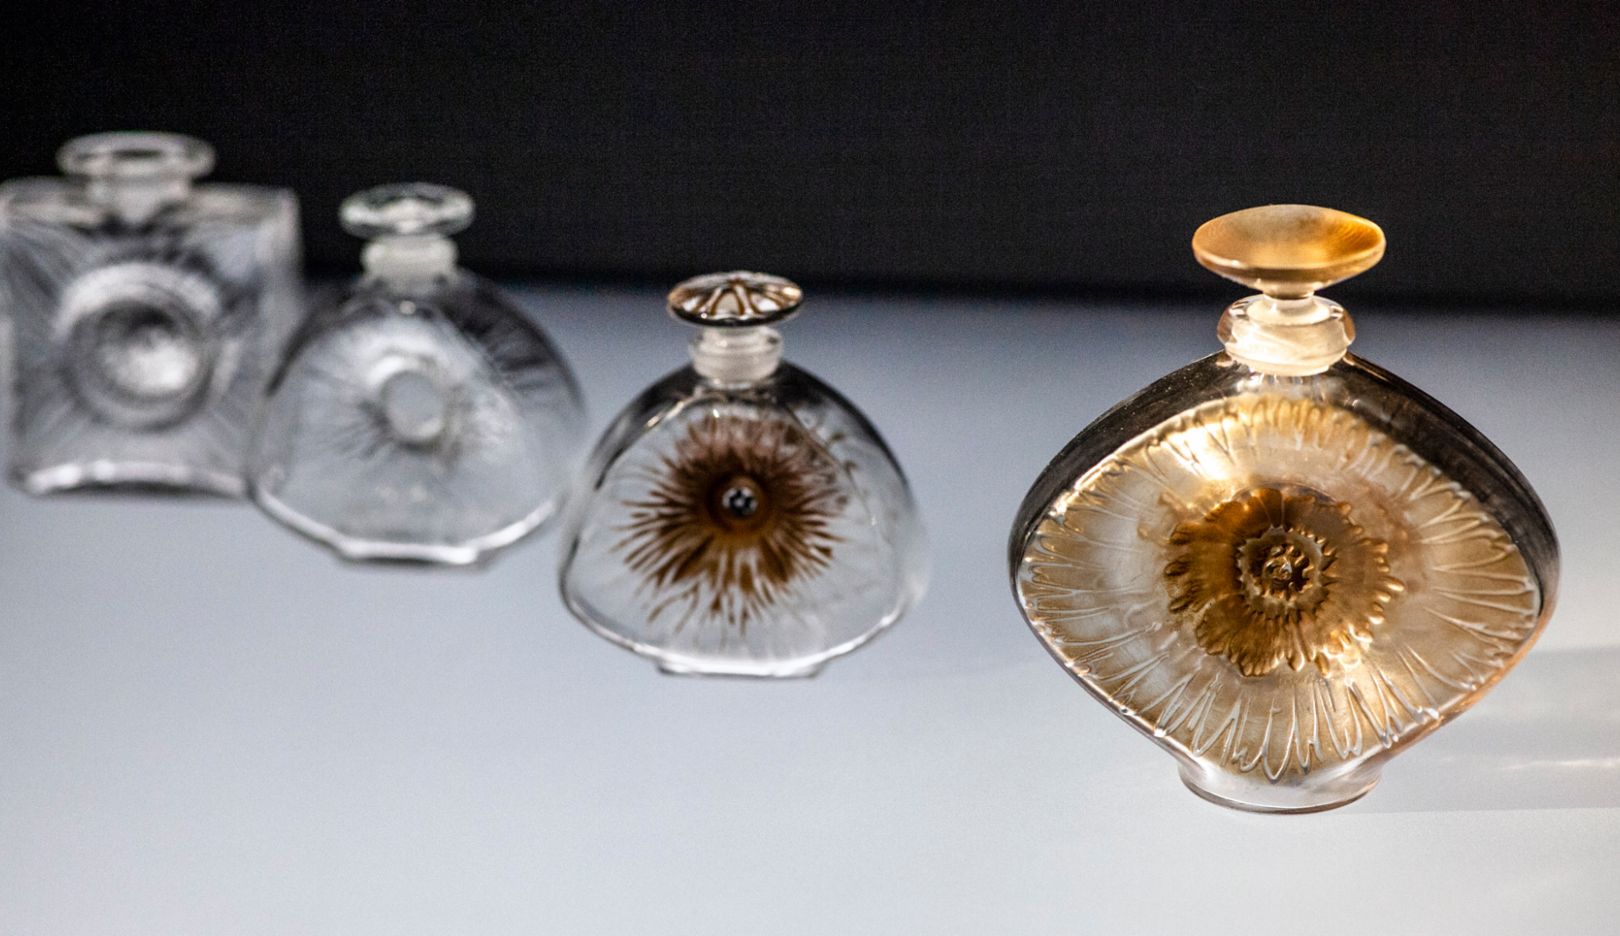 René Lalique revolutionised flacon production, and his innovations were copied accordingly, which is why he tried to protect himself with his first patents in 1911 and 1912. This collection from 1911 is one of them. From left to right, the classic box shape of Dahlia changes via Fleur and Althéa to a stylised eye: the blossom becomes a shimmering iris.